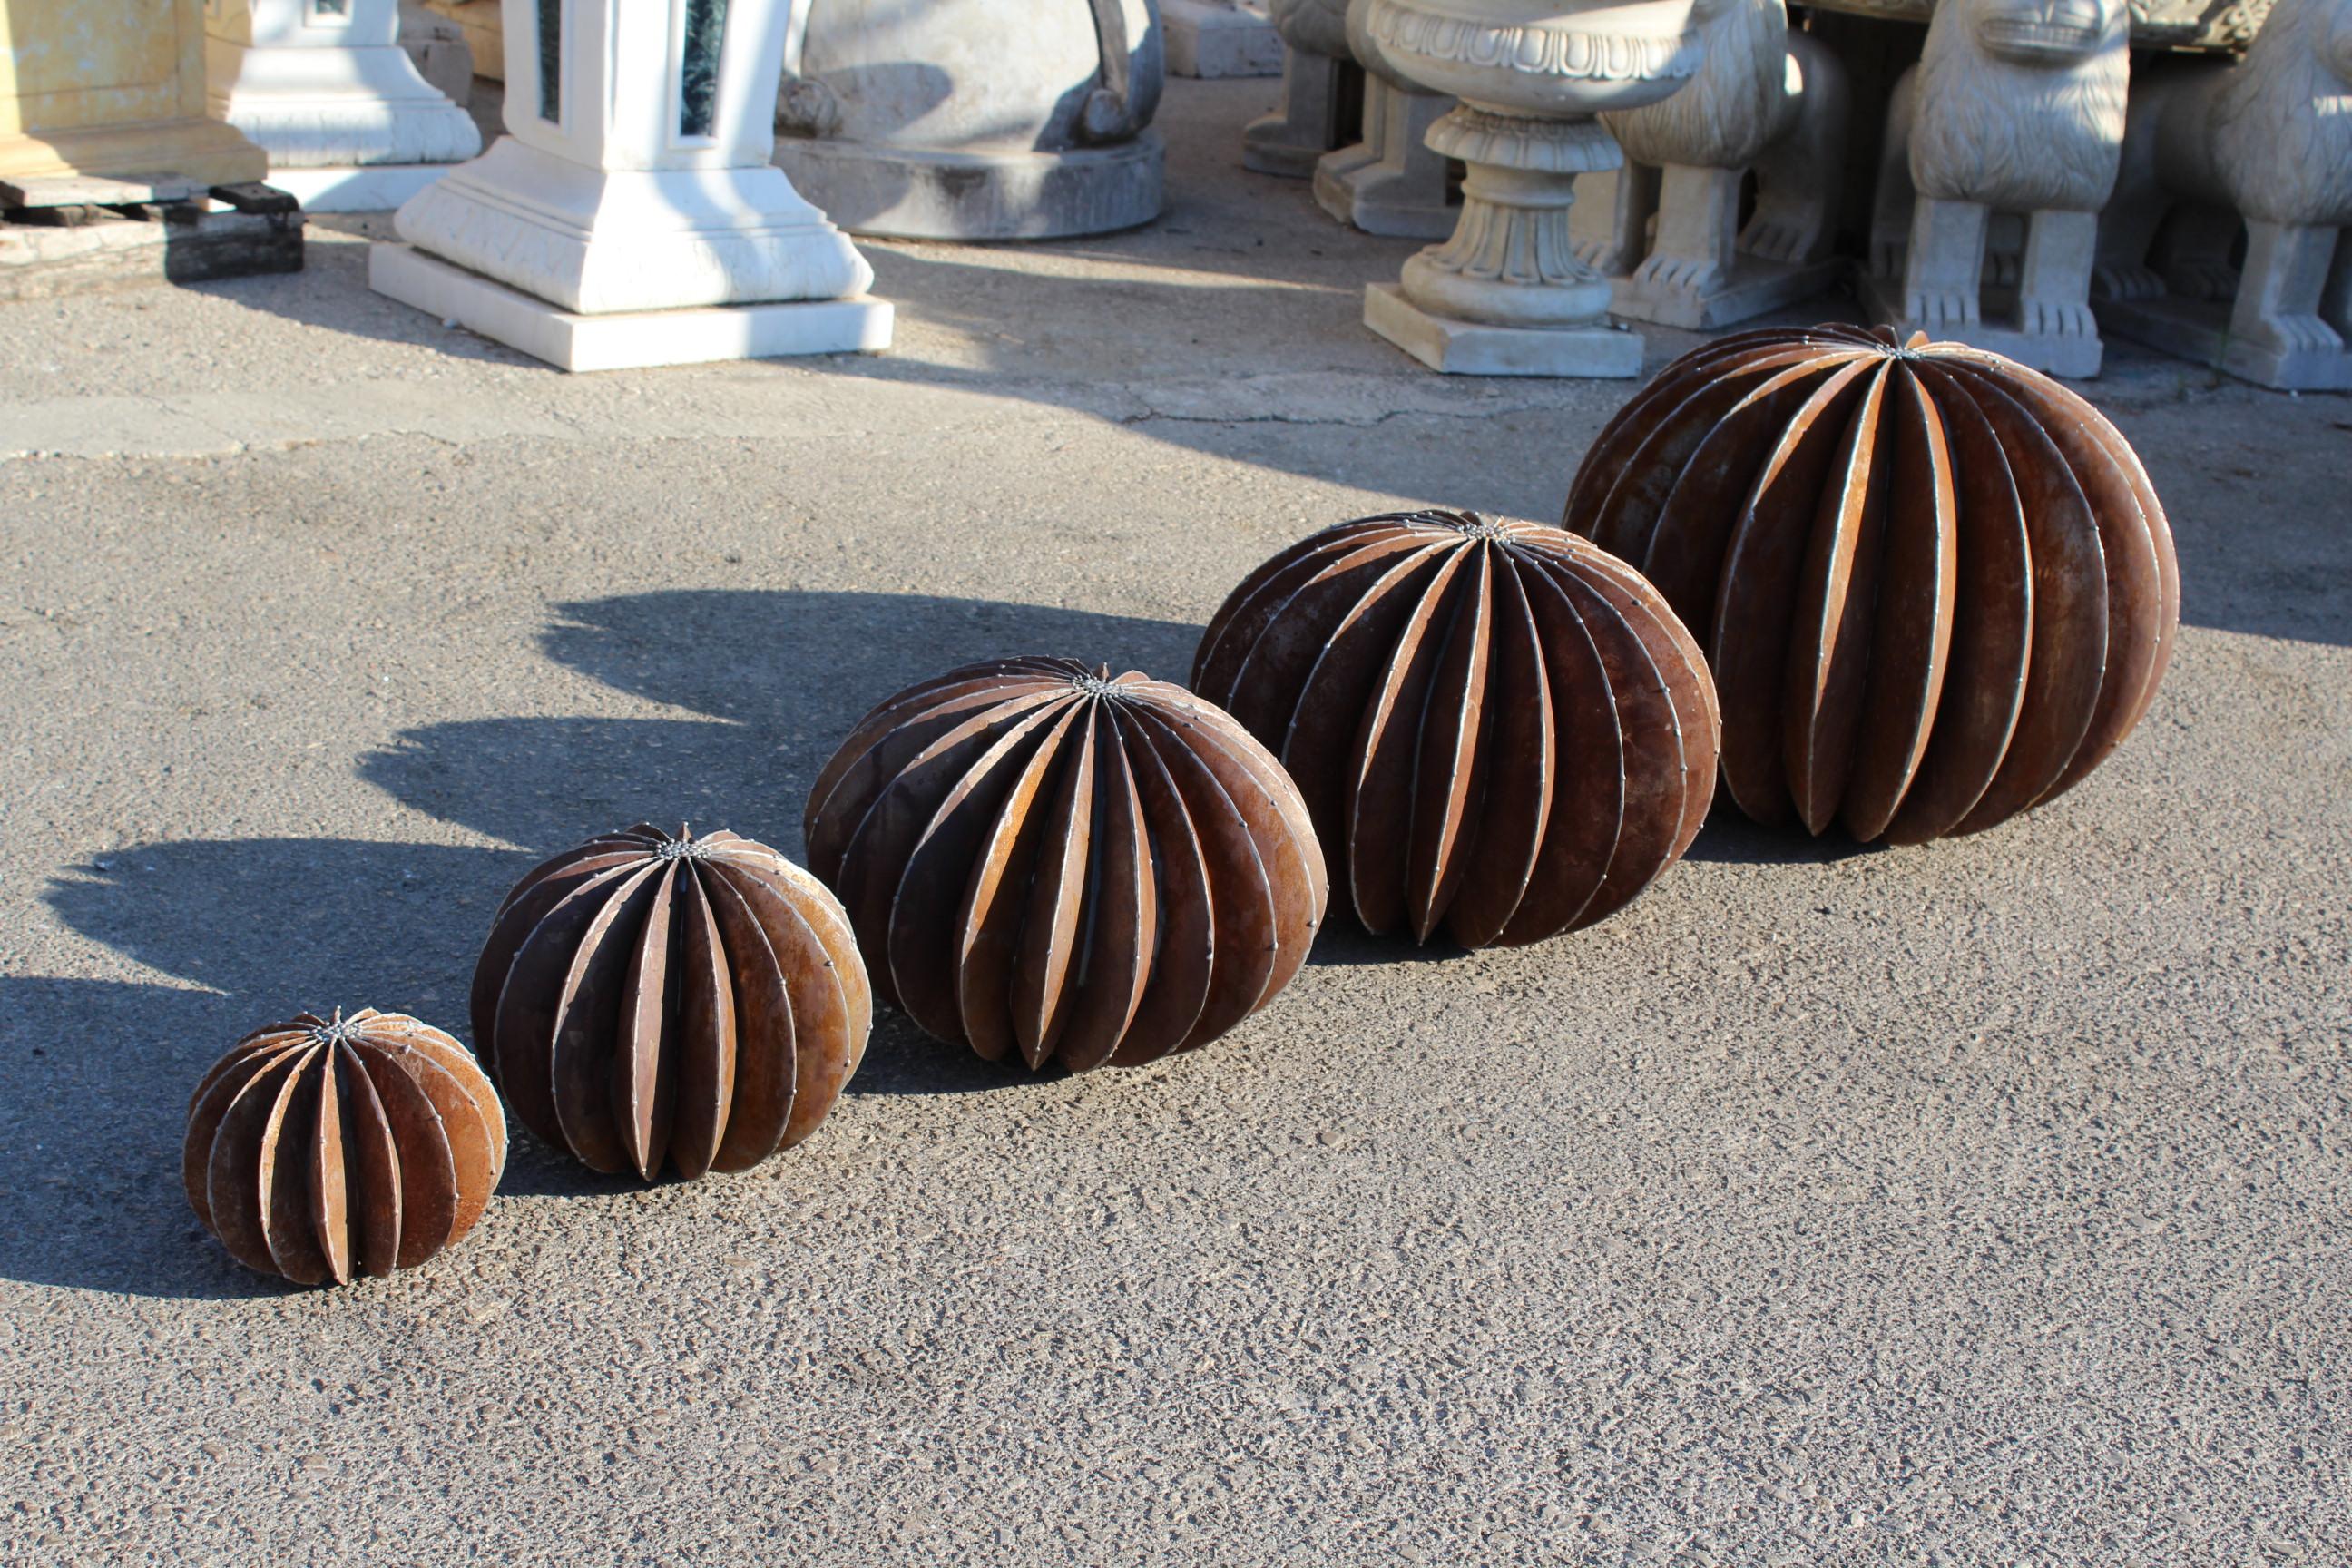 Spanish Set of Iron Ball Cactus Sculptures in Different Sizes